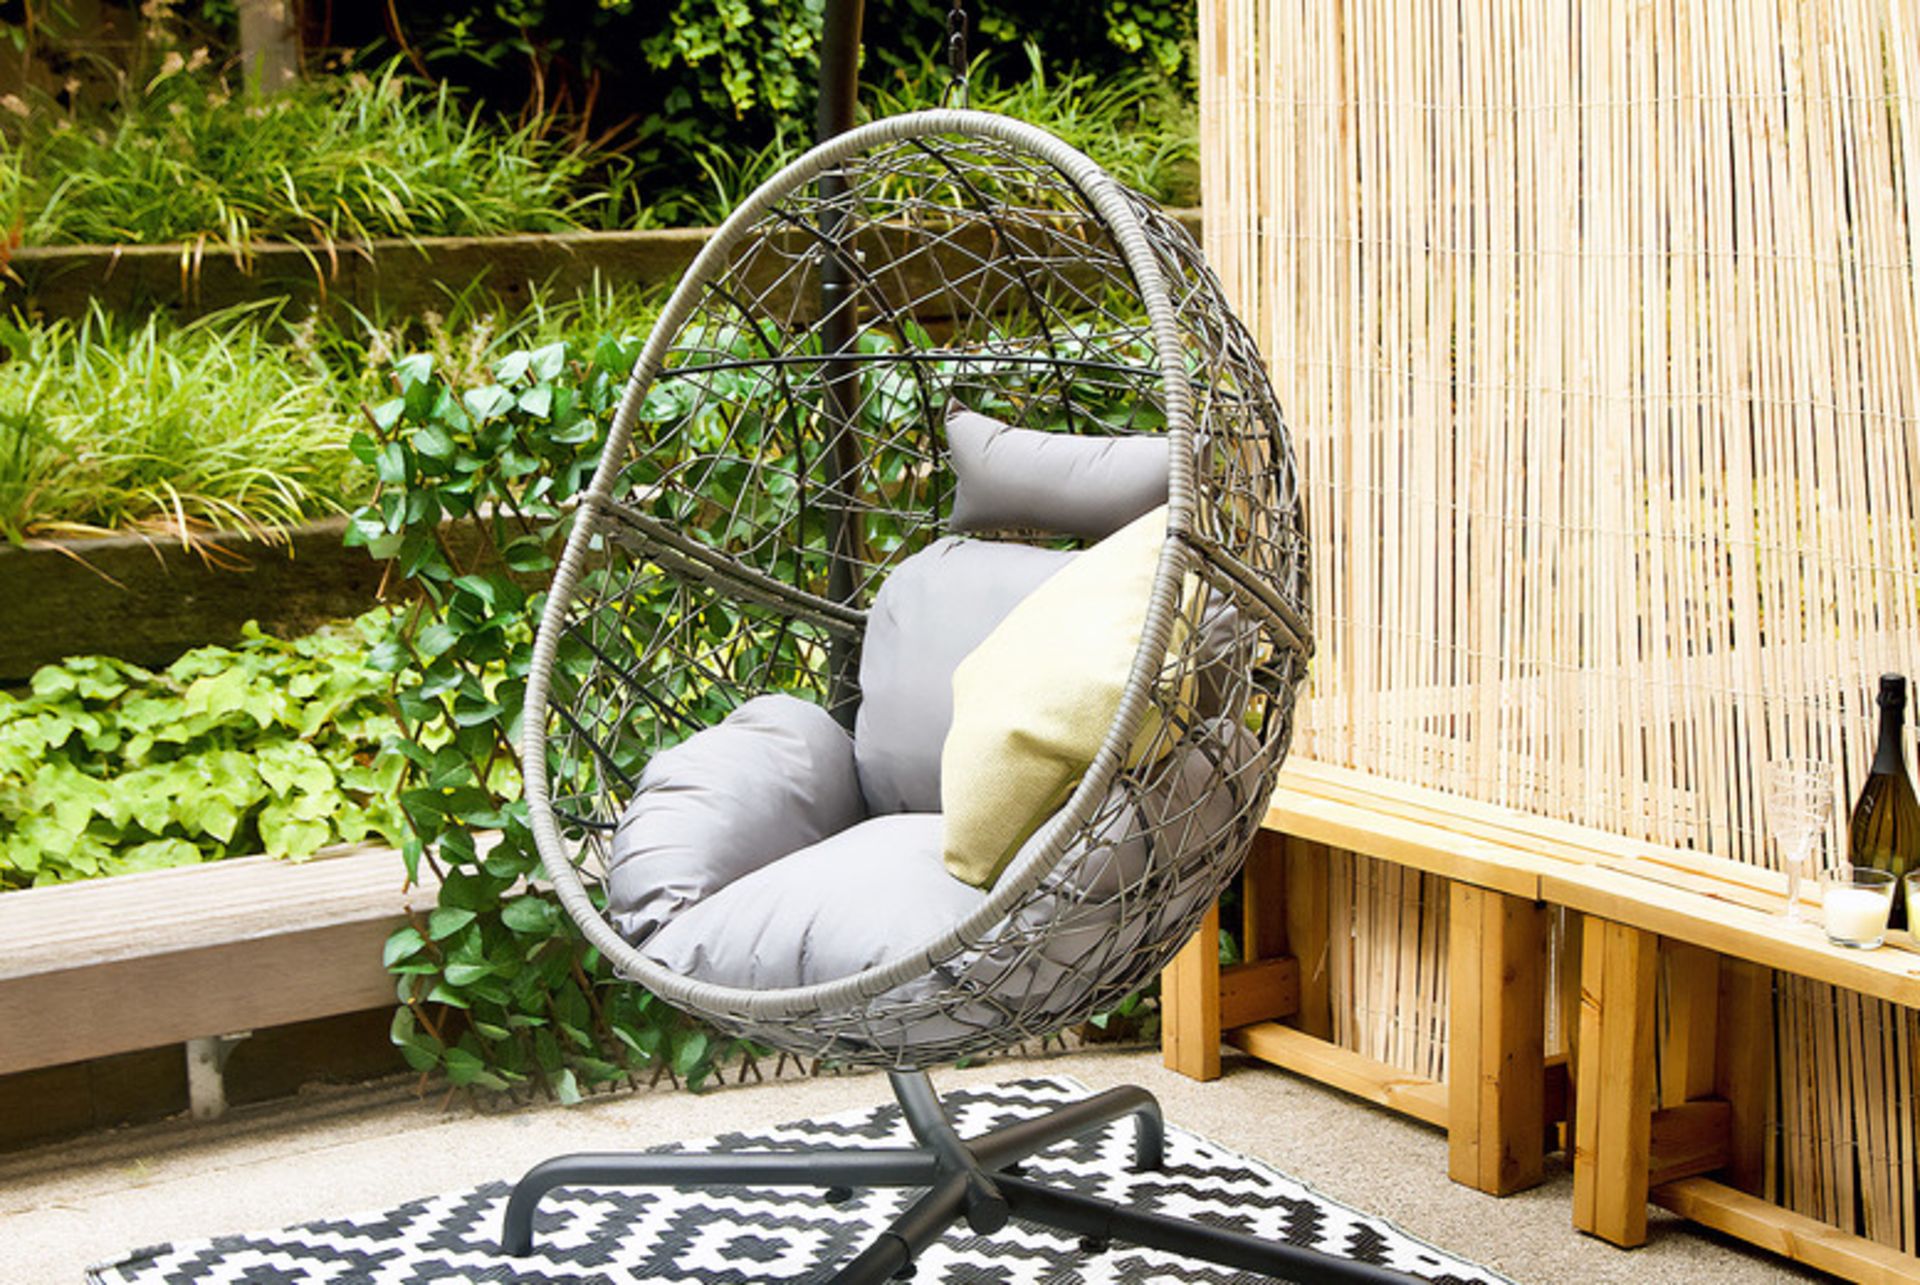 FREE DELIVERY - JOB LOT OF 5X HANGING EGG CHAIR WITH A CUSHION AND PILLOW - GREY